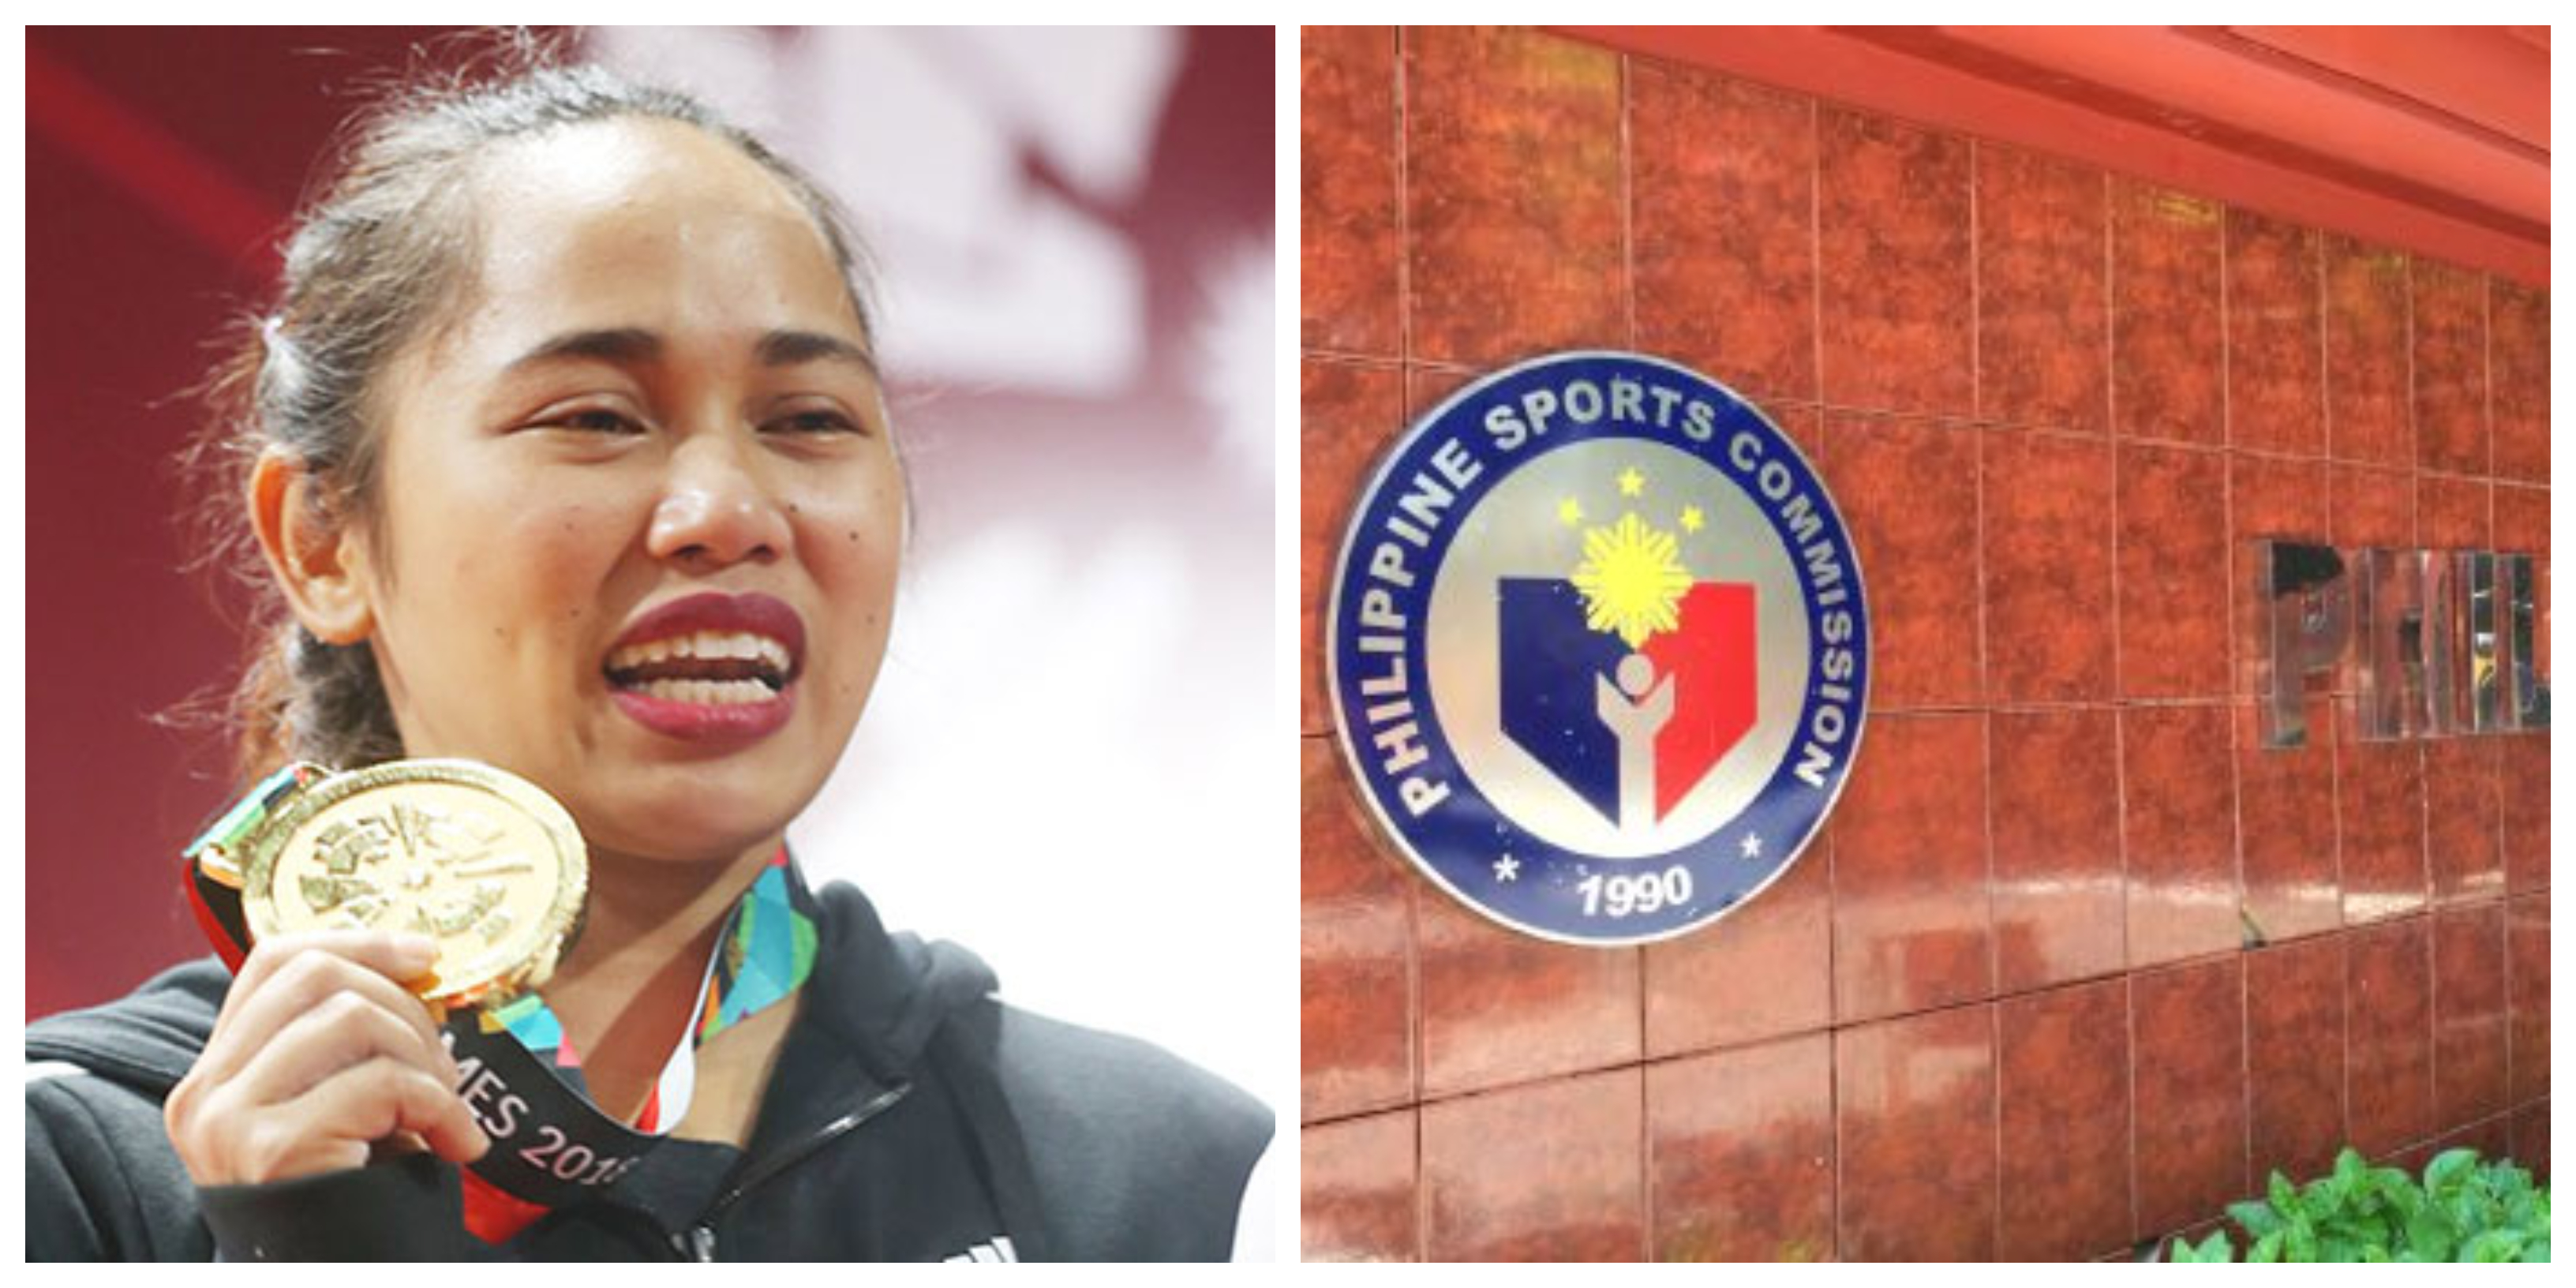 Hidilyn Diaz and the Philippine Sports Commission